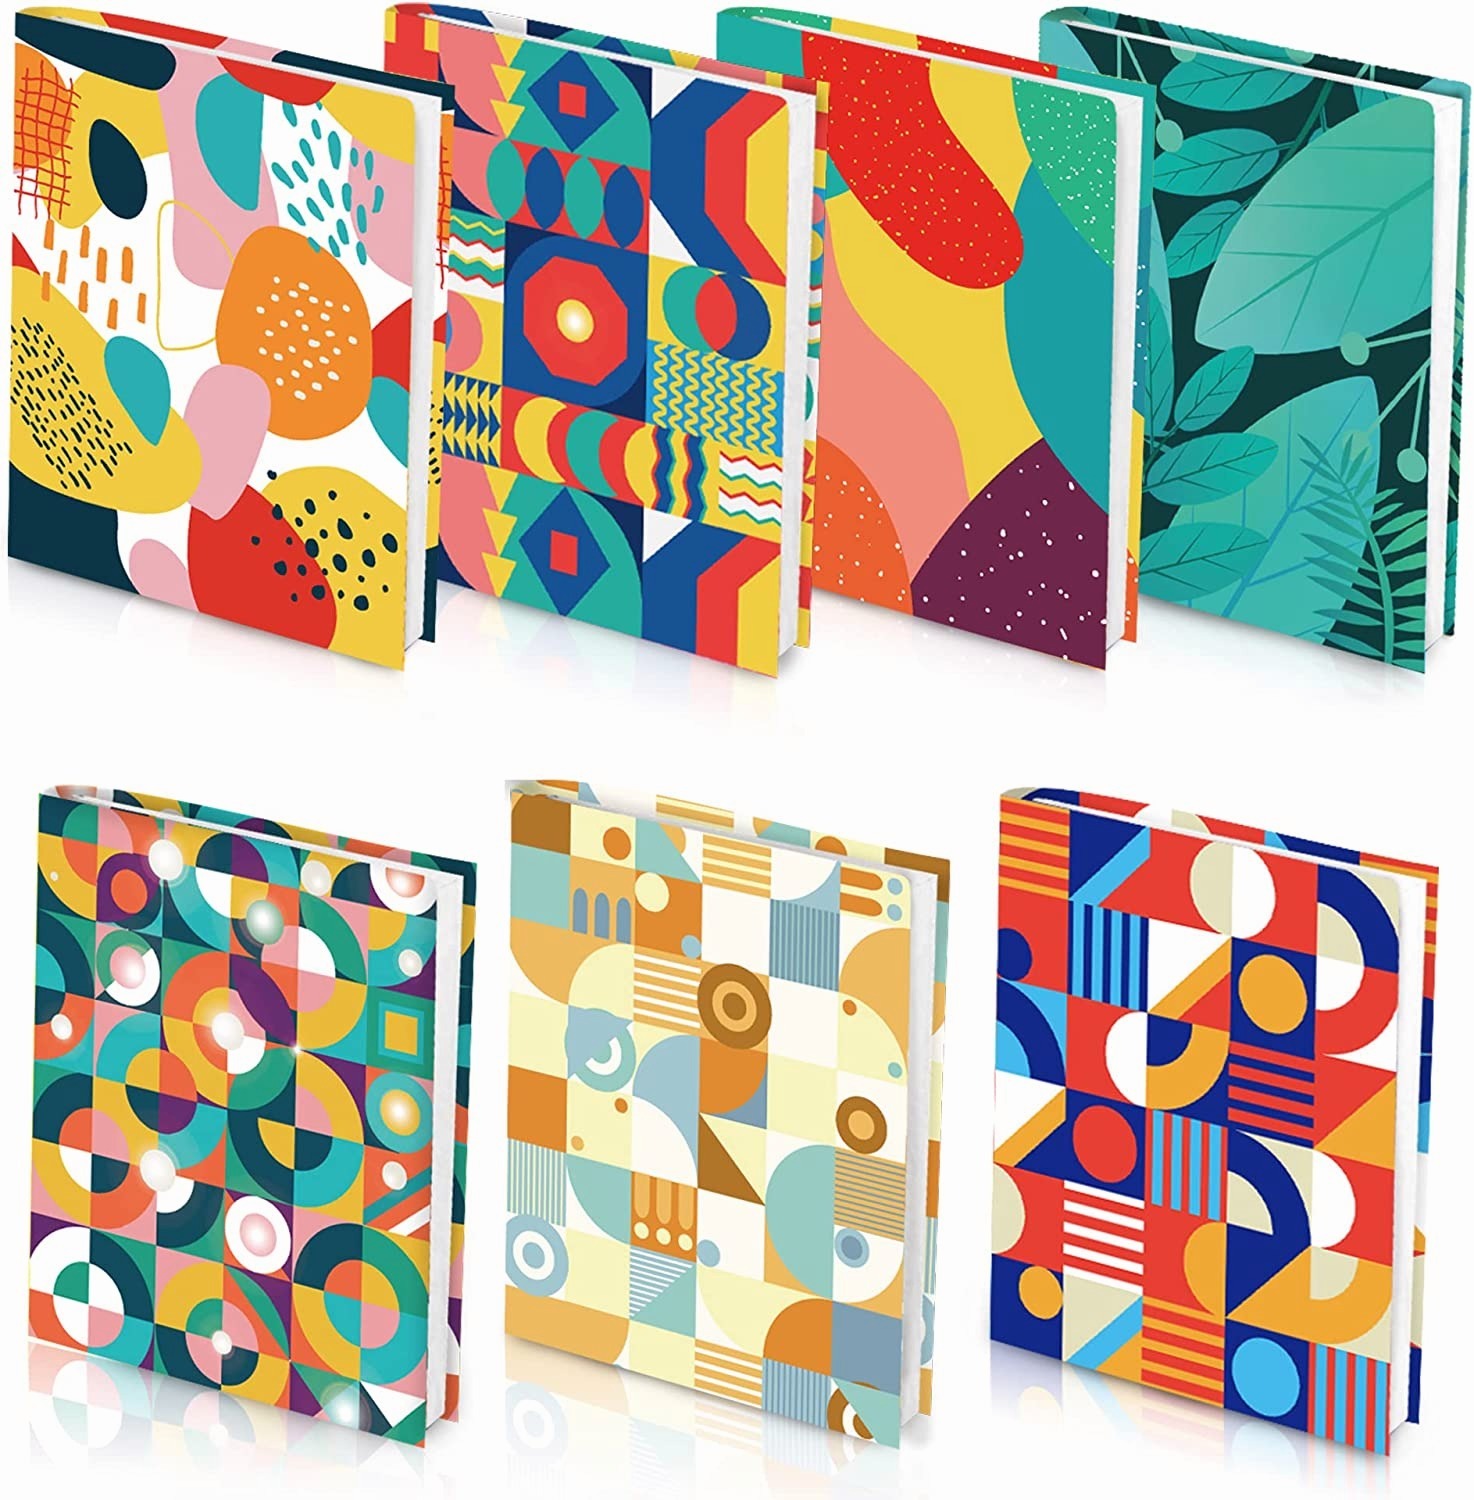 Feela 7 Pack Geometric Pattern Book Covers $9.00 + Free shipping w/ Prime or $25+